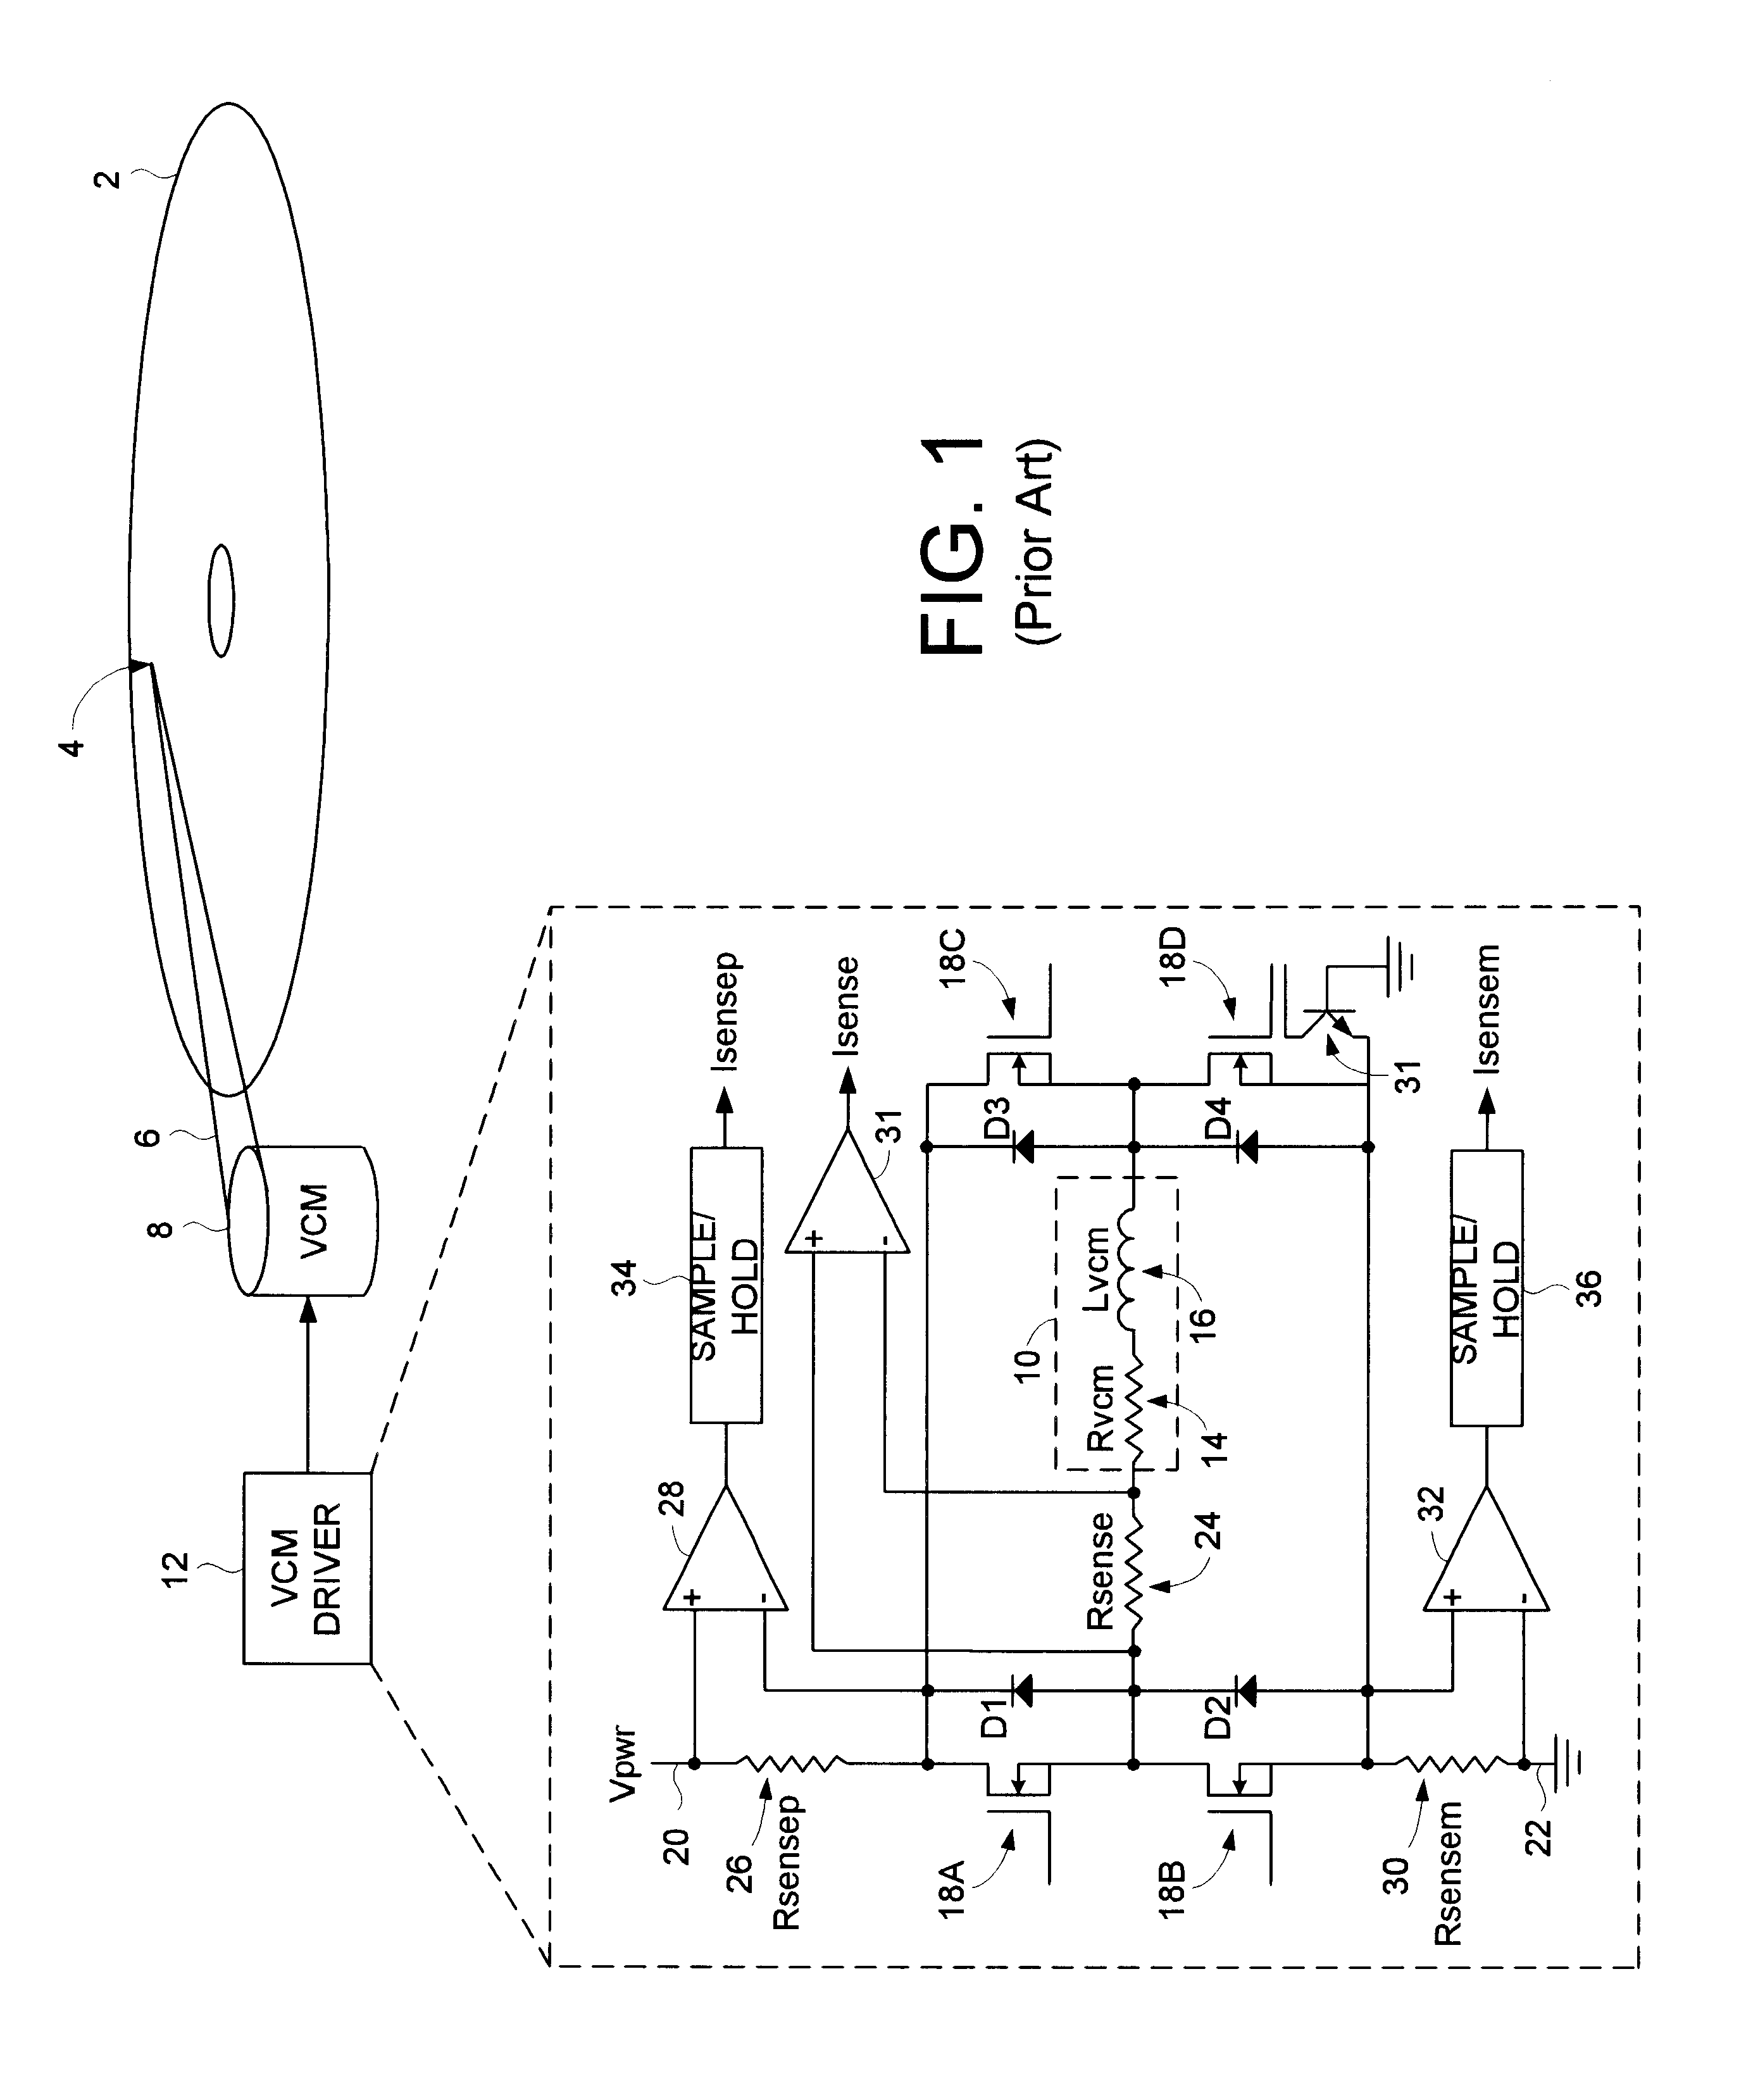 Disk drive comprising oscillators and counters for sensing current in a voice coil motor